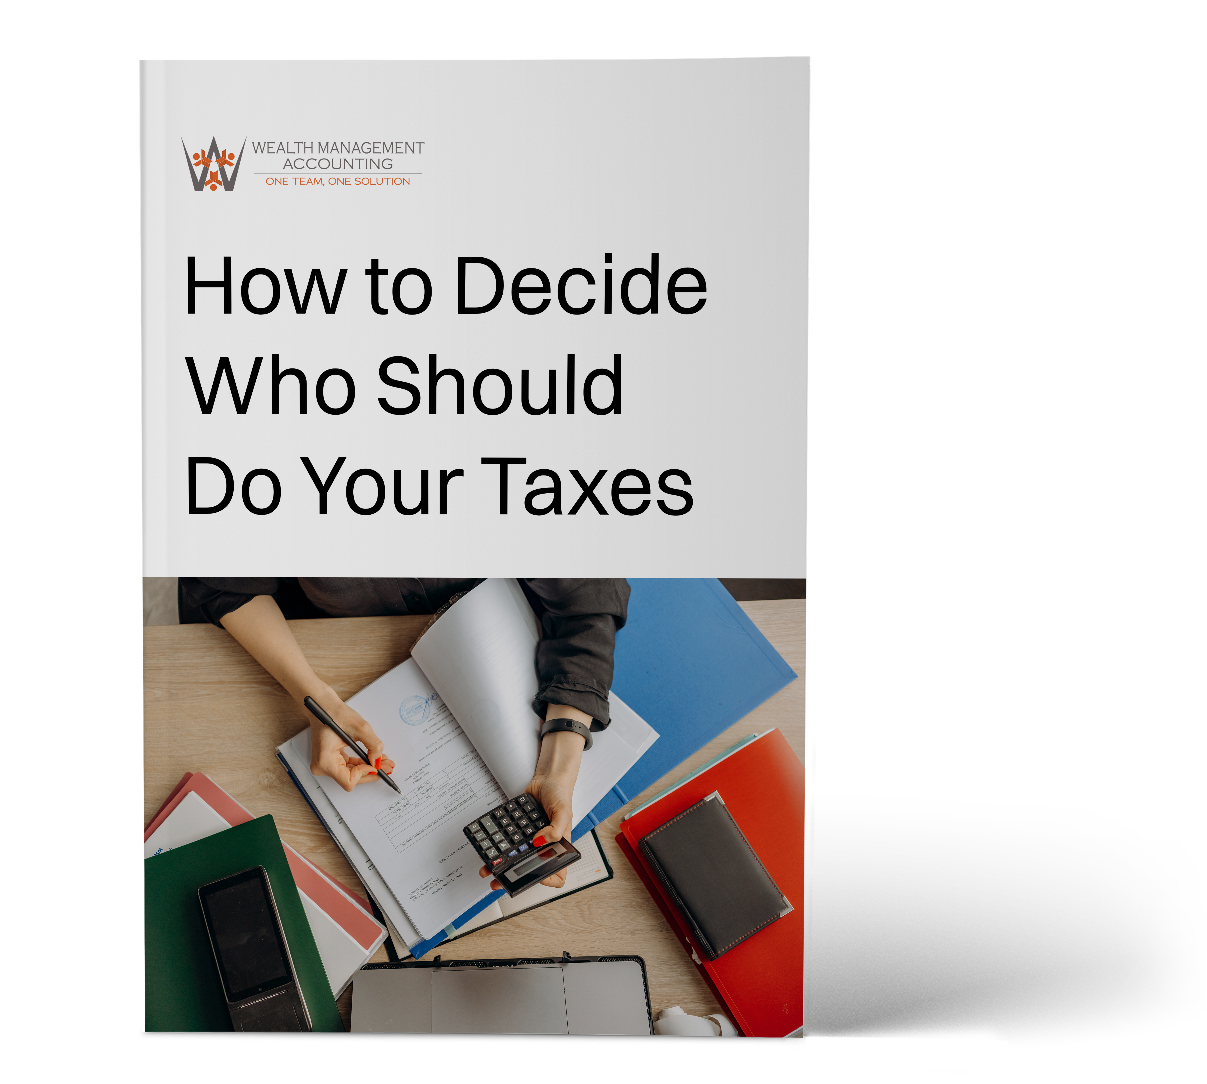 How to decide who should do your taxes